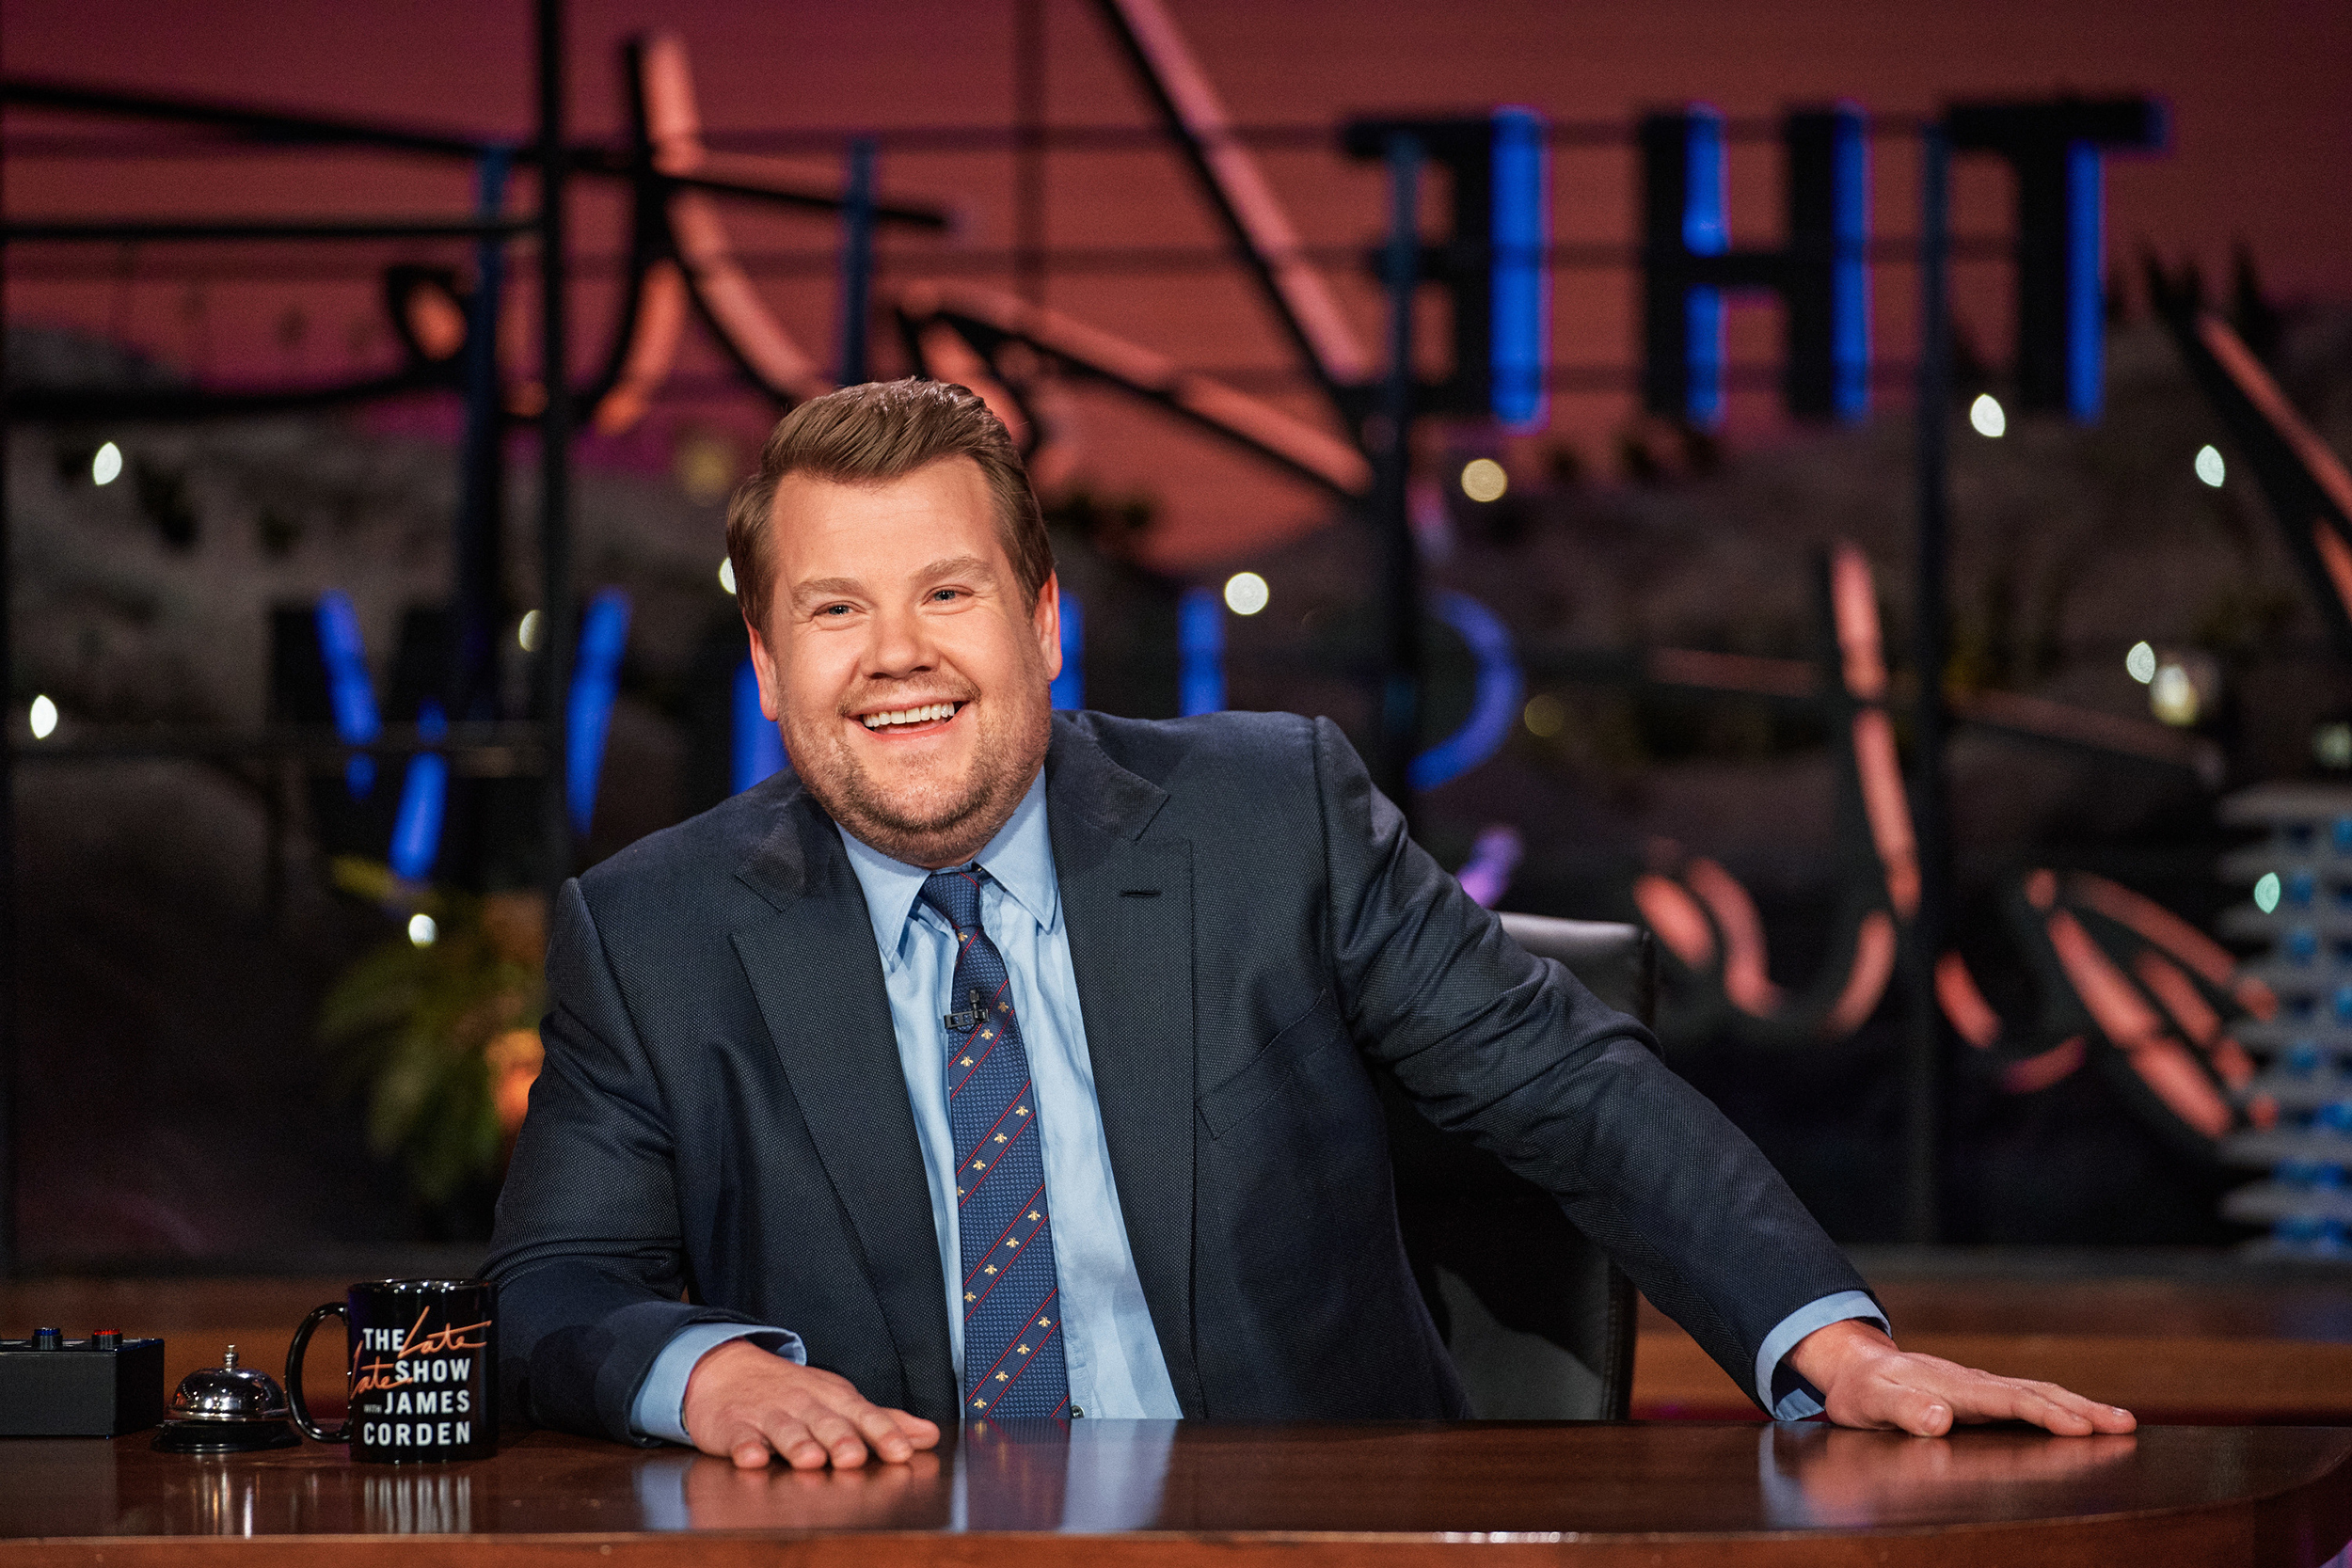 James Corden to Host SiriusXM Show 'This Life of Mine with James Corden': 'A New Chapter'